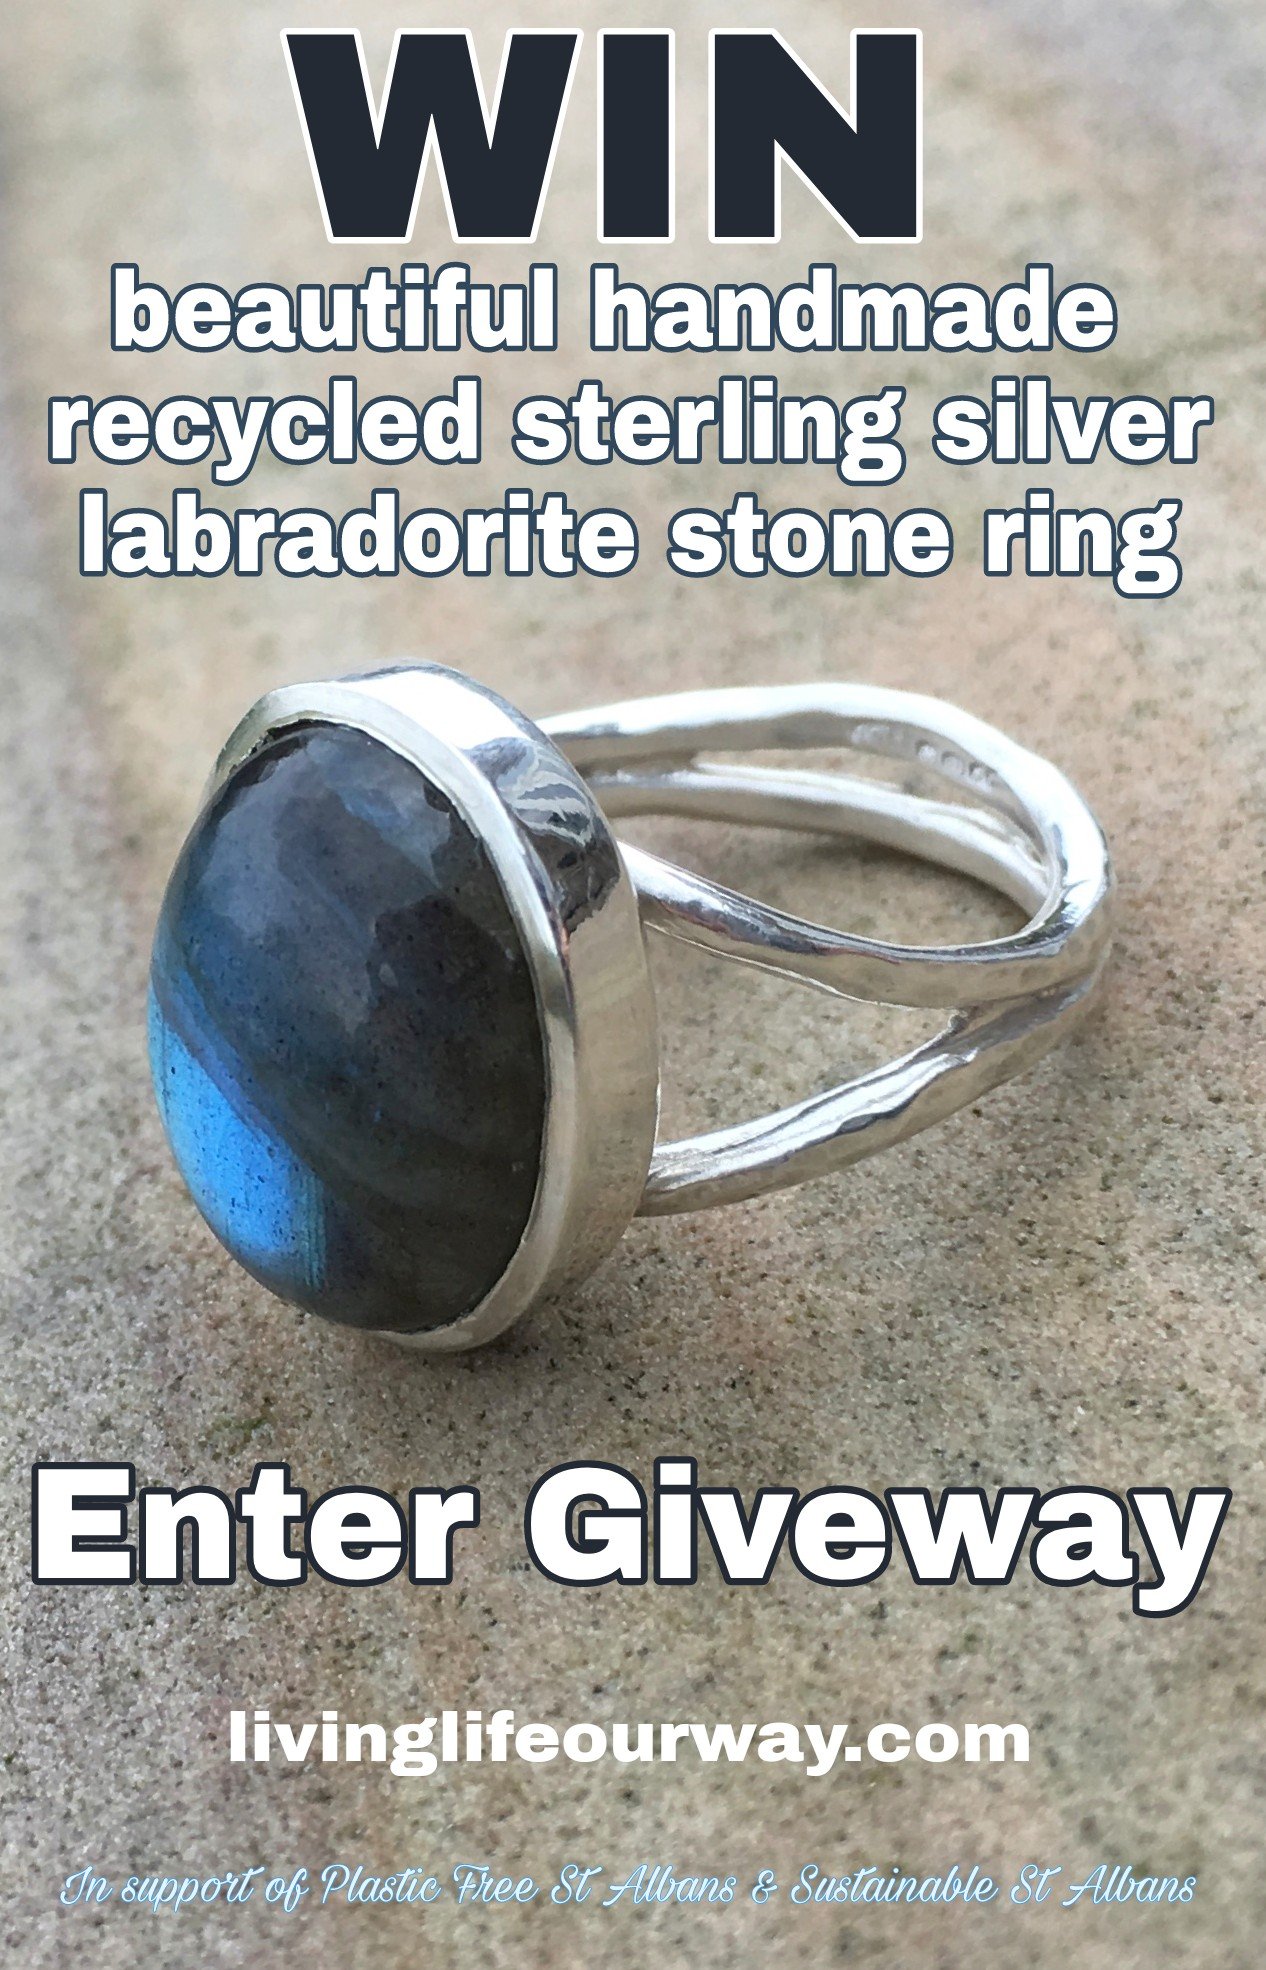 Handmade recycled silver labradorite stone ring image and giveaway wording